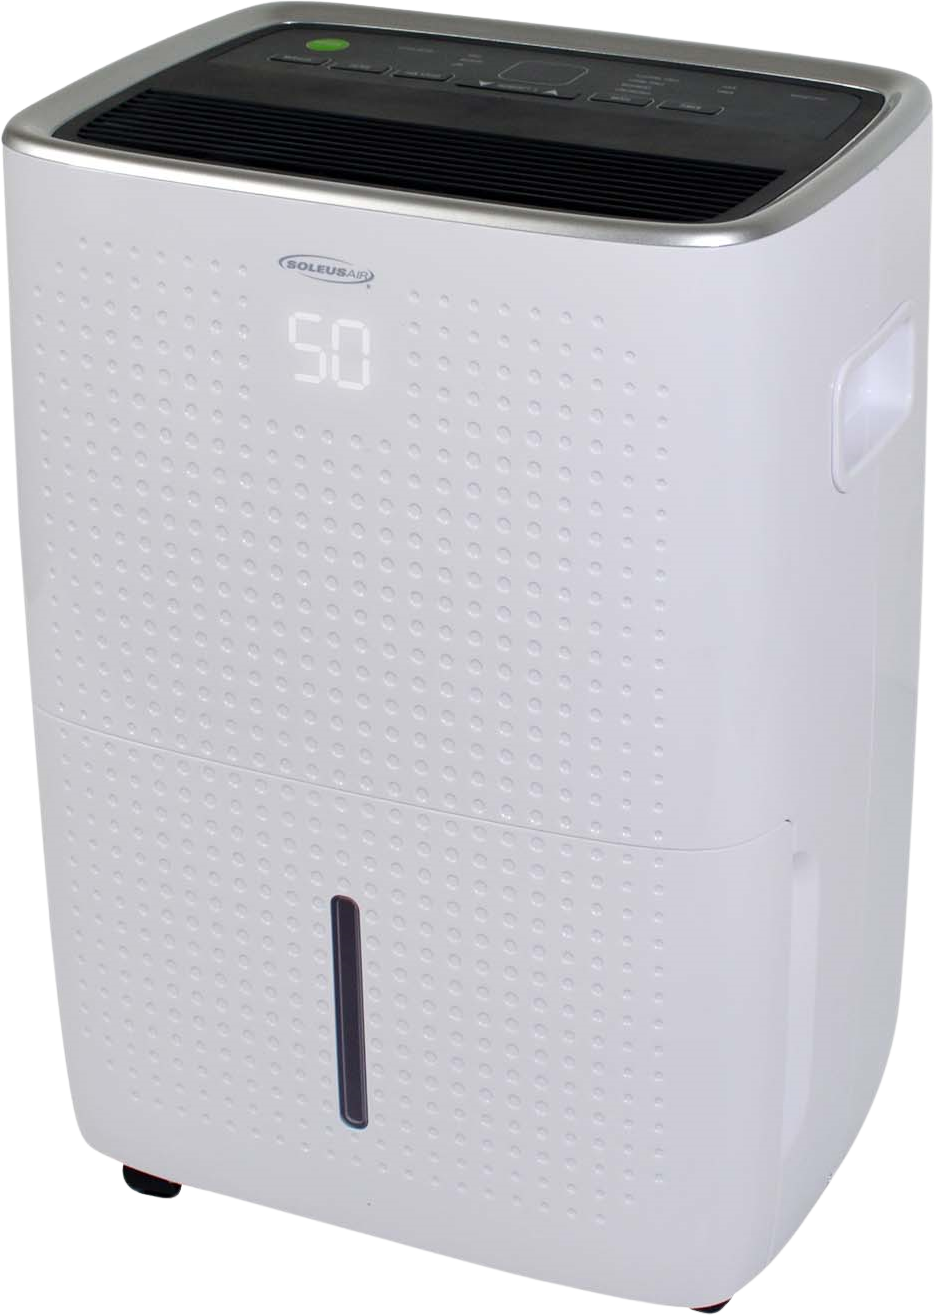 Soleus Air, Soleus Air DSJ-25E-01 Dehumidifier 25 Pint with Mirage Display Continuous Drainage Outlet 2.6 Amp New